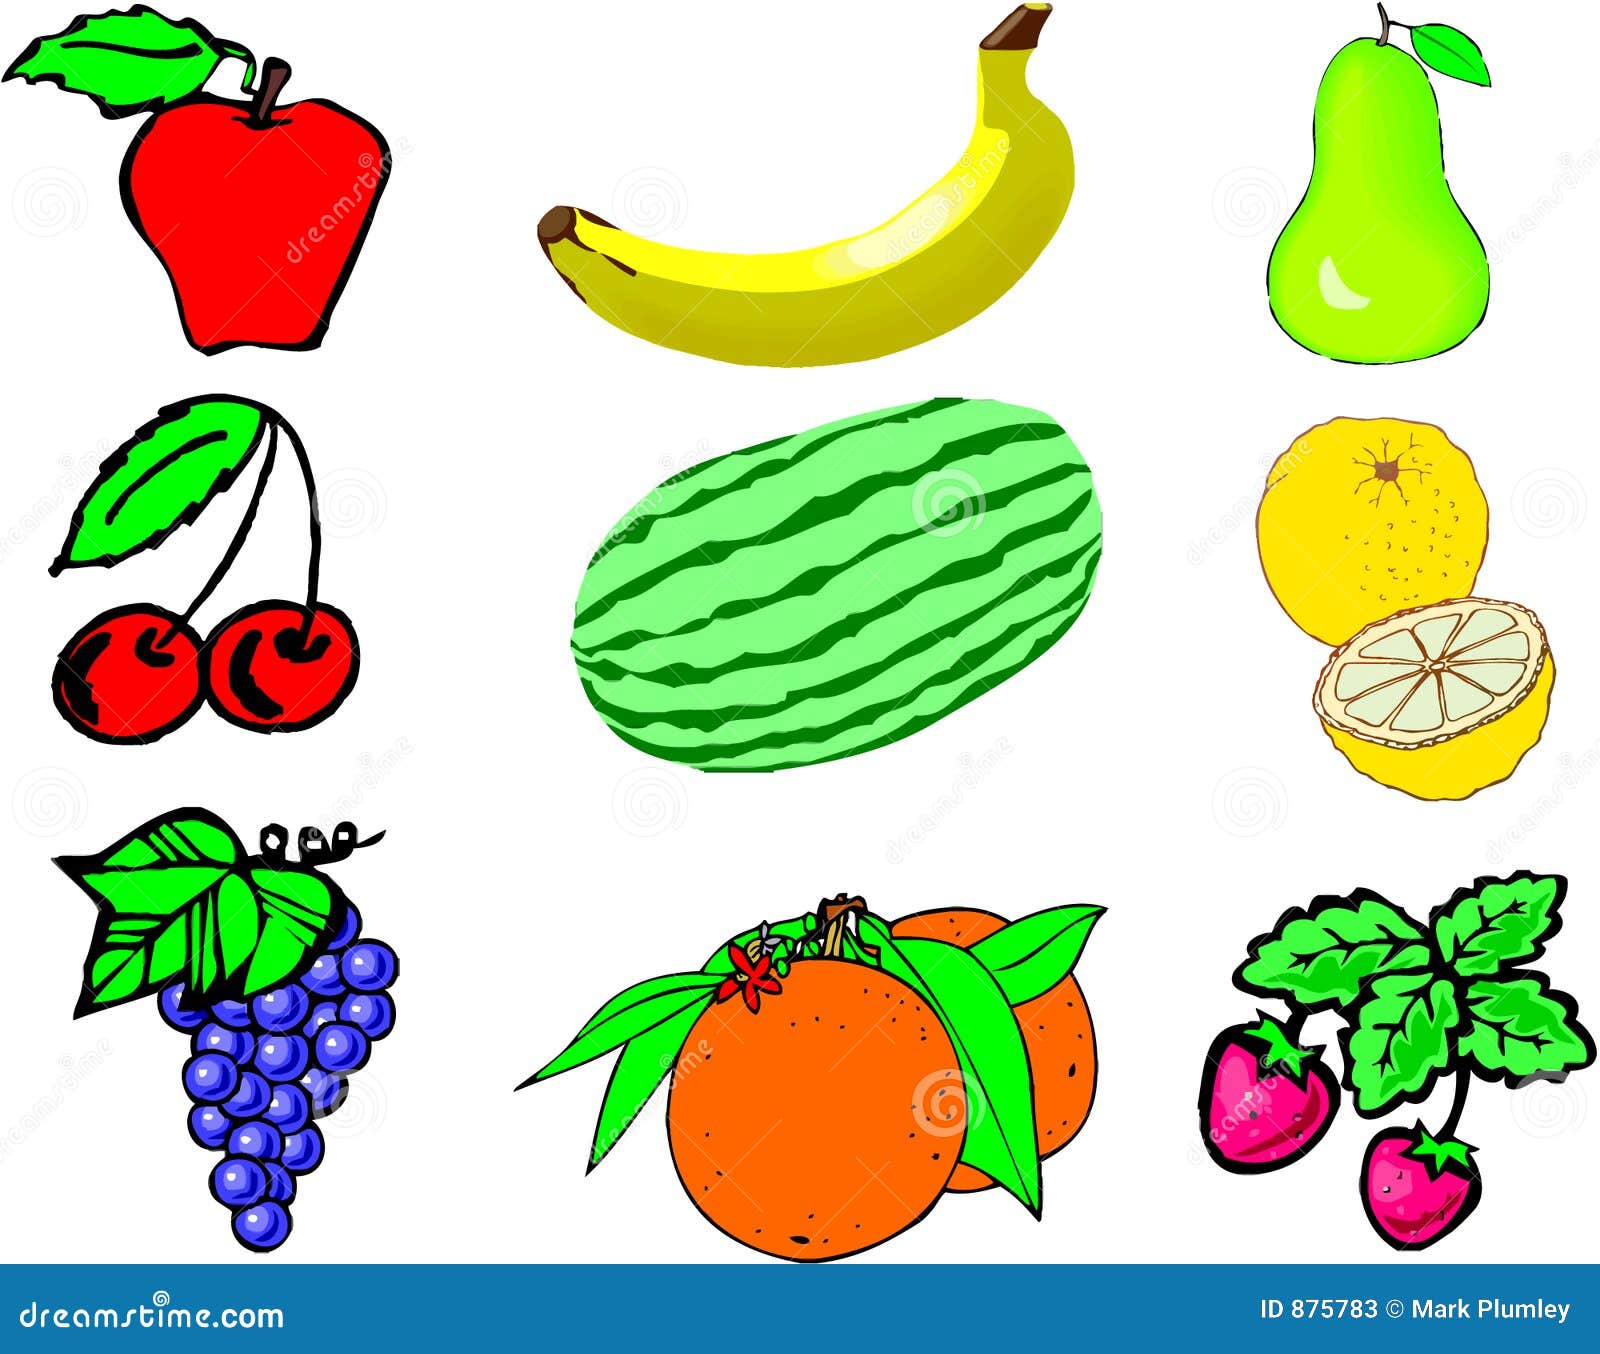 clipart of different fruits - photo #27